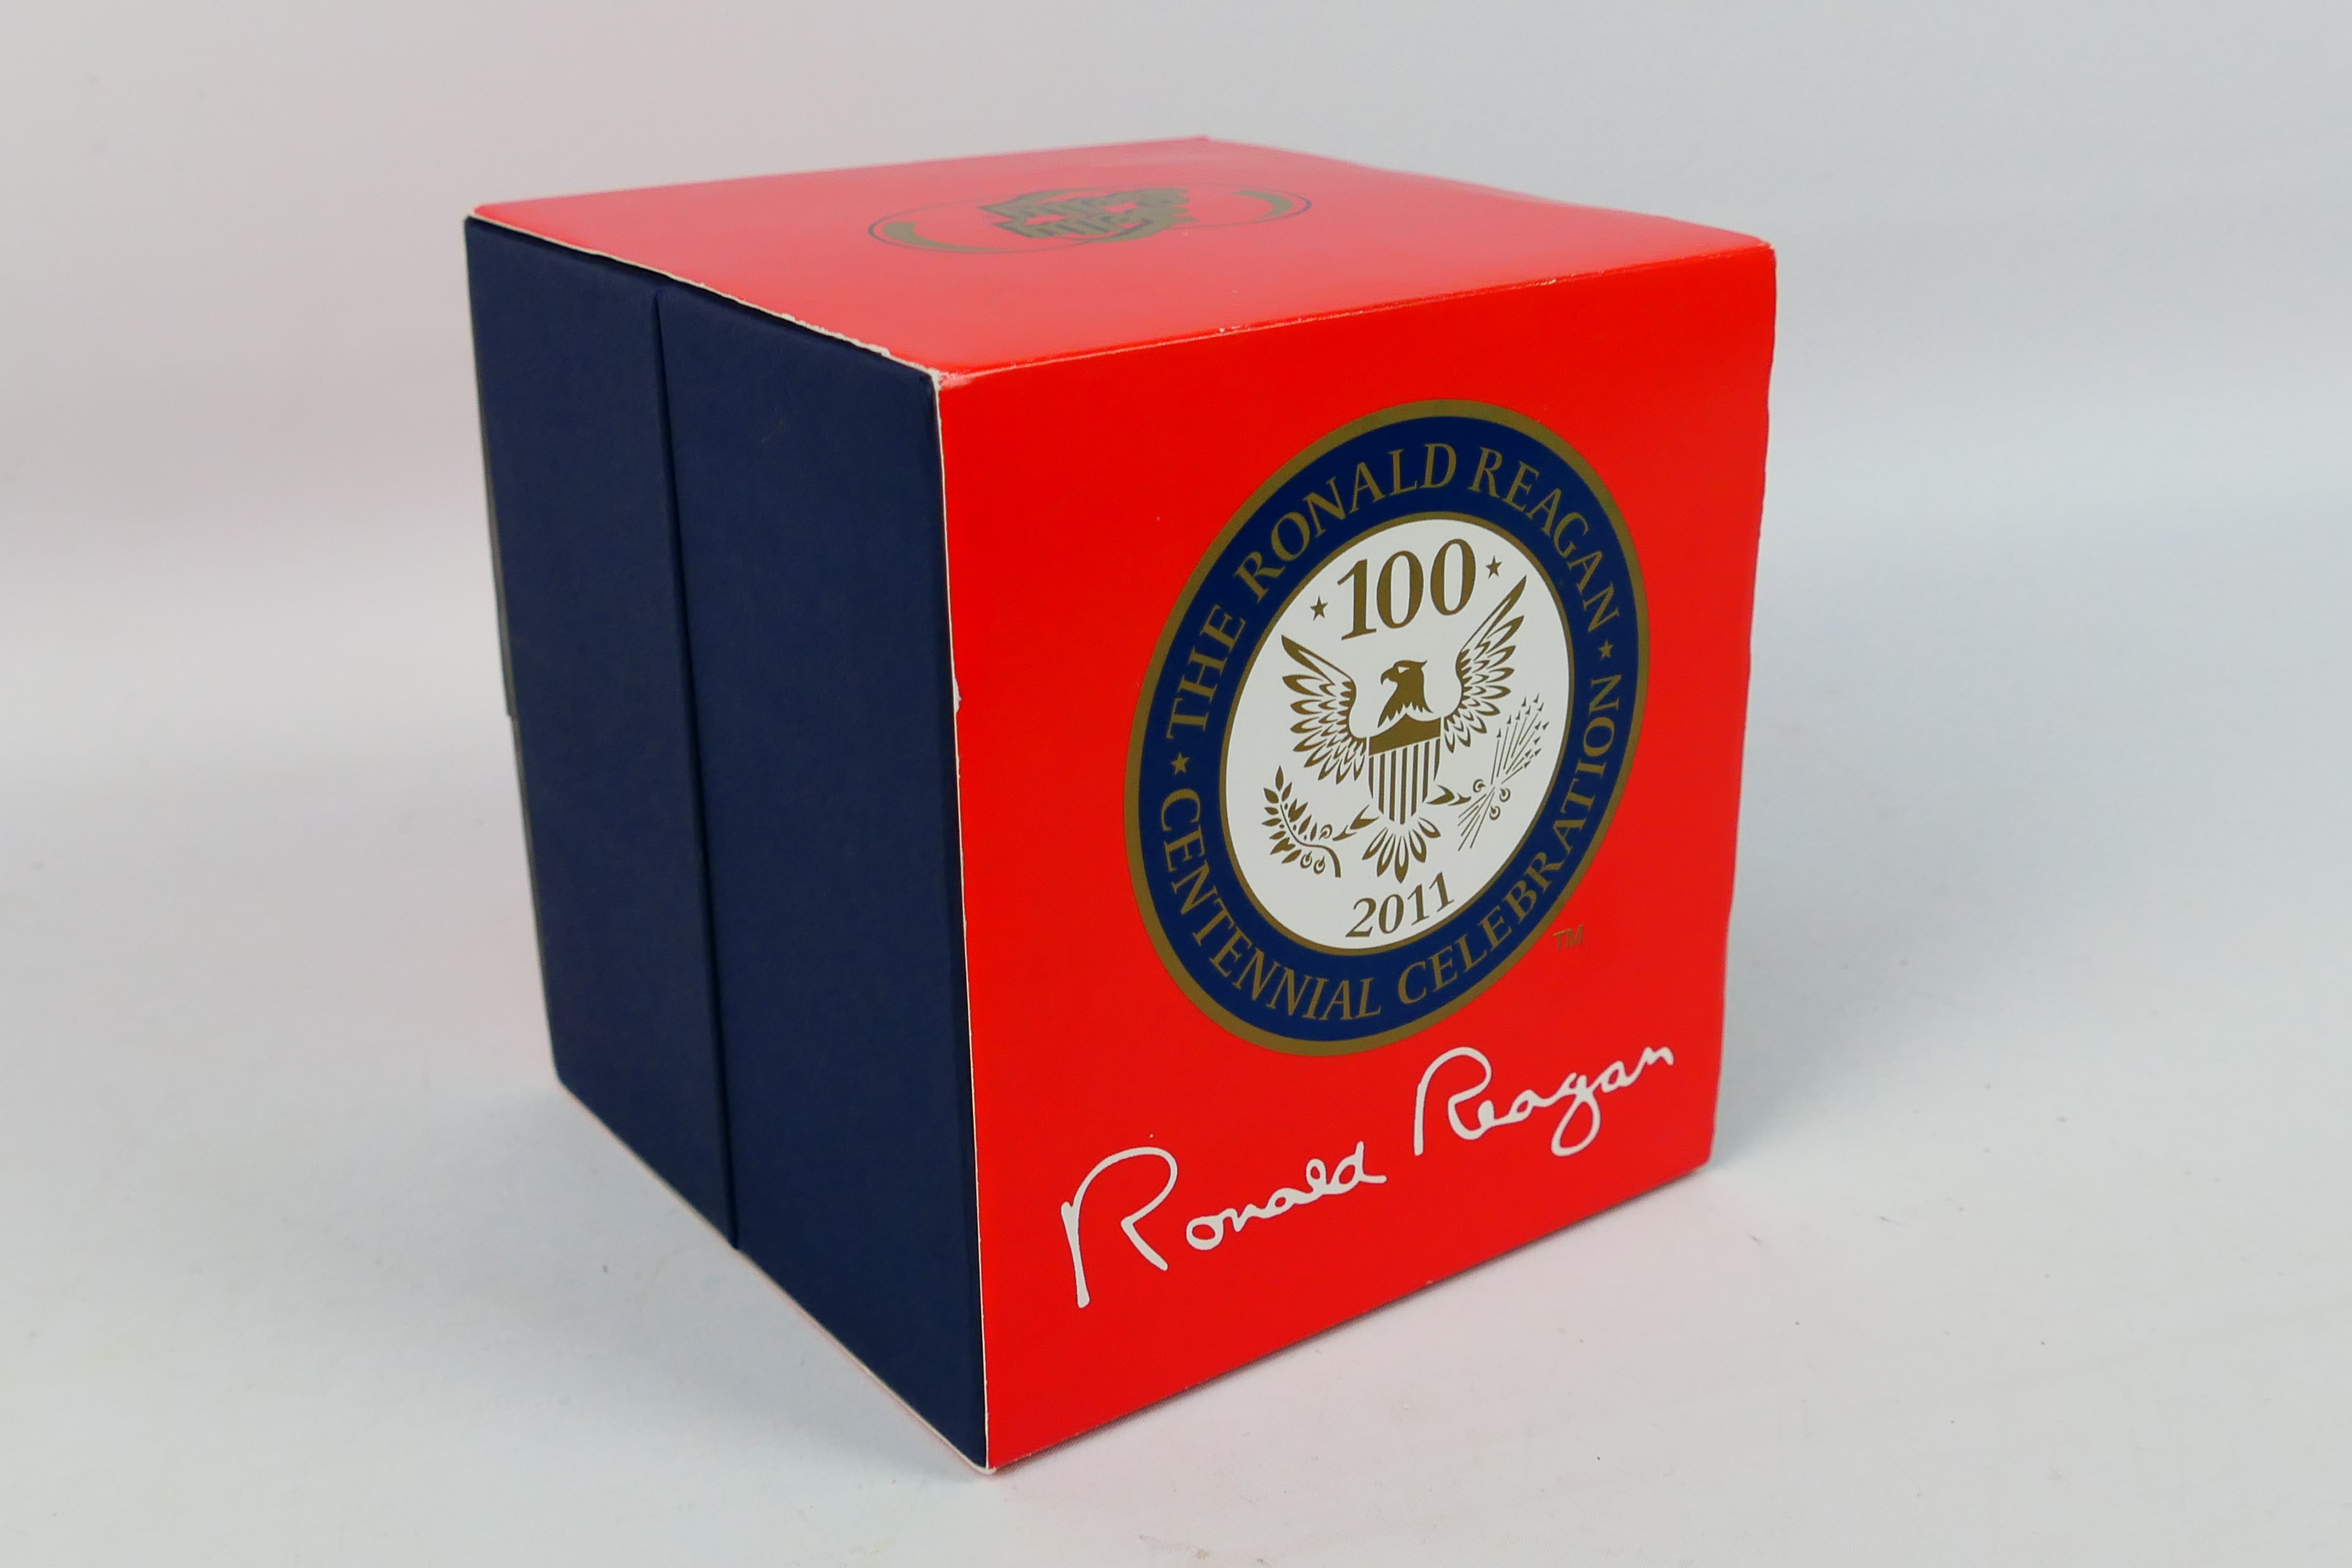 Ronald Reagan - An unopened and boxed jar of Jelly Belly jelly beans produced for The Ronald Reagan - Image 8 of 8